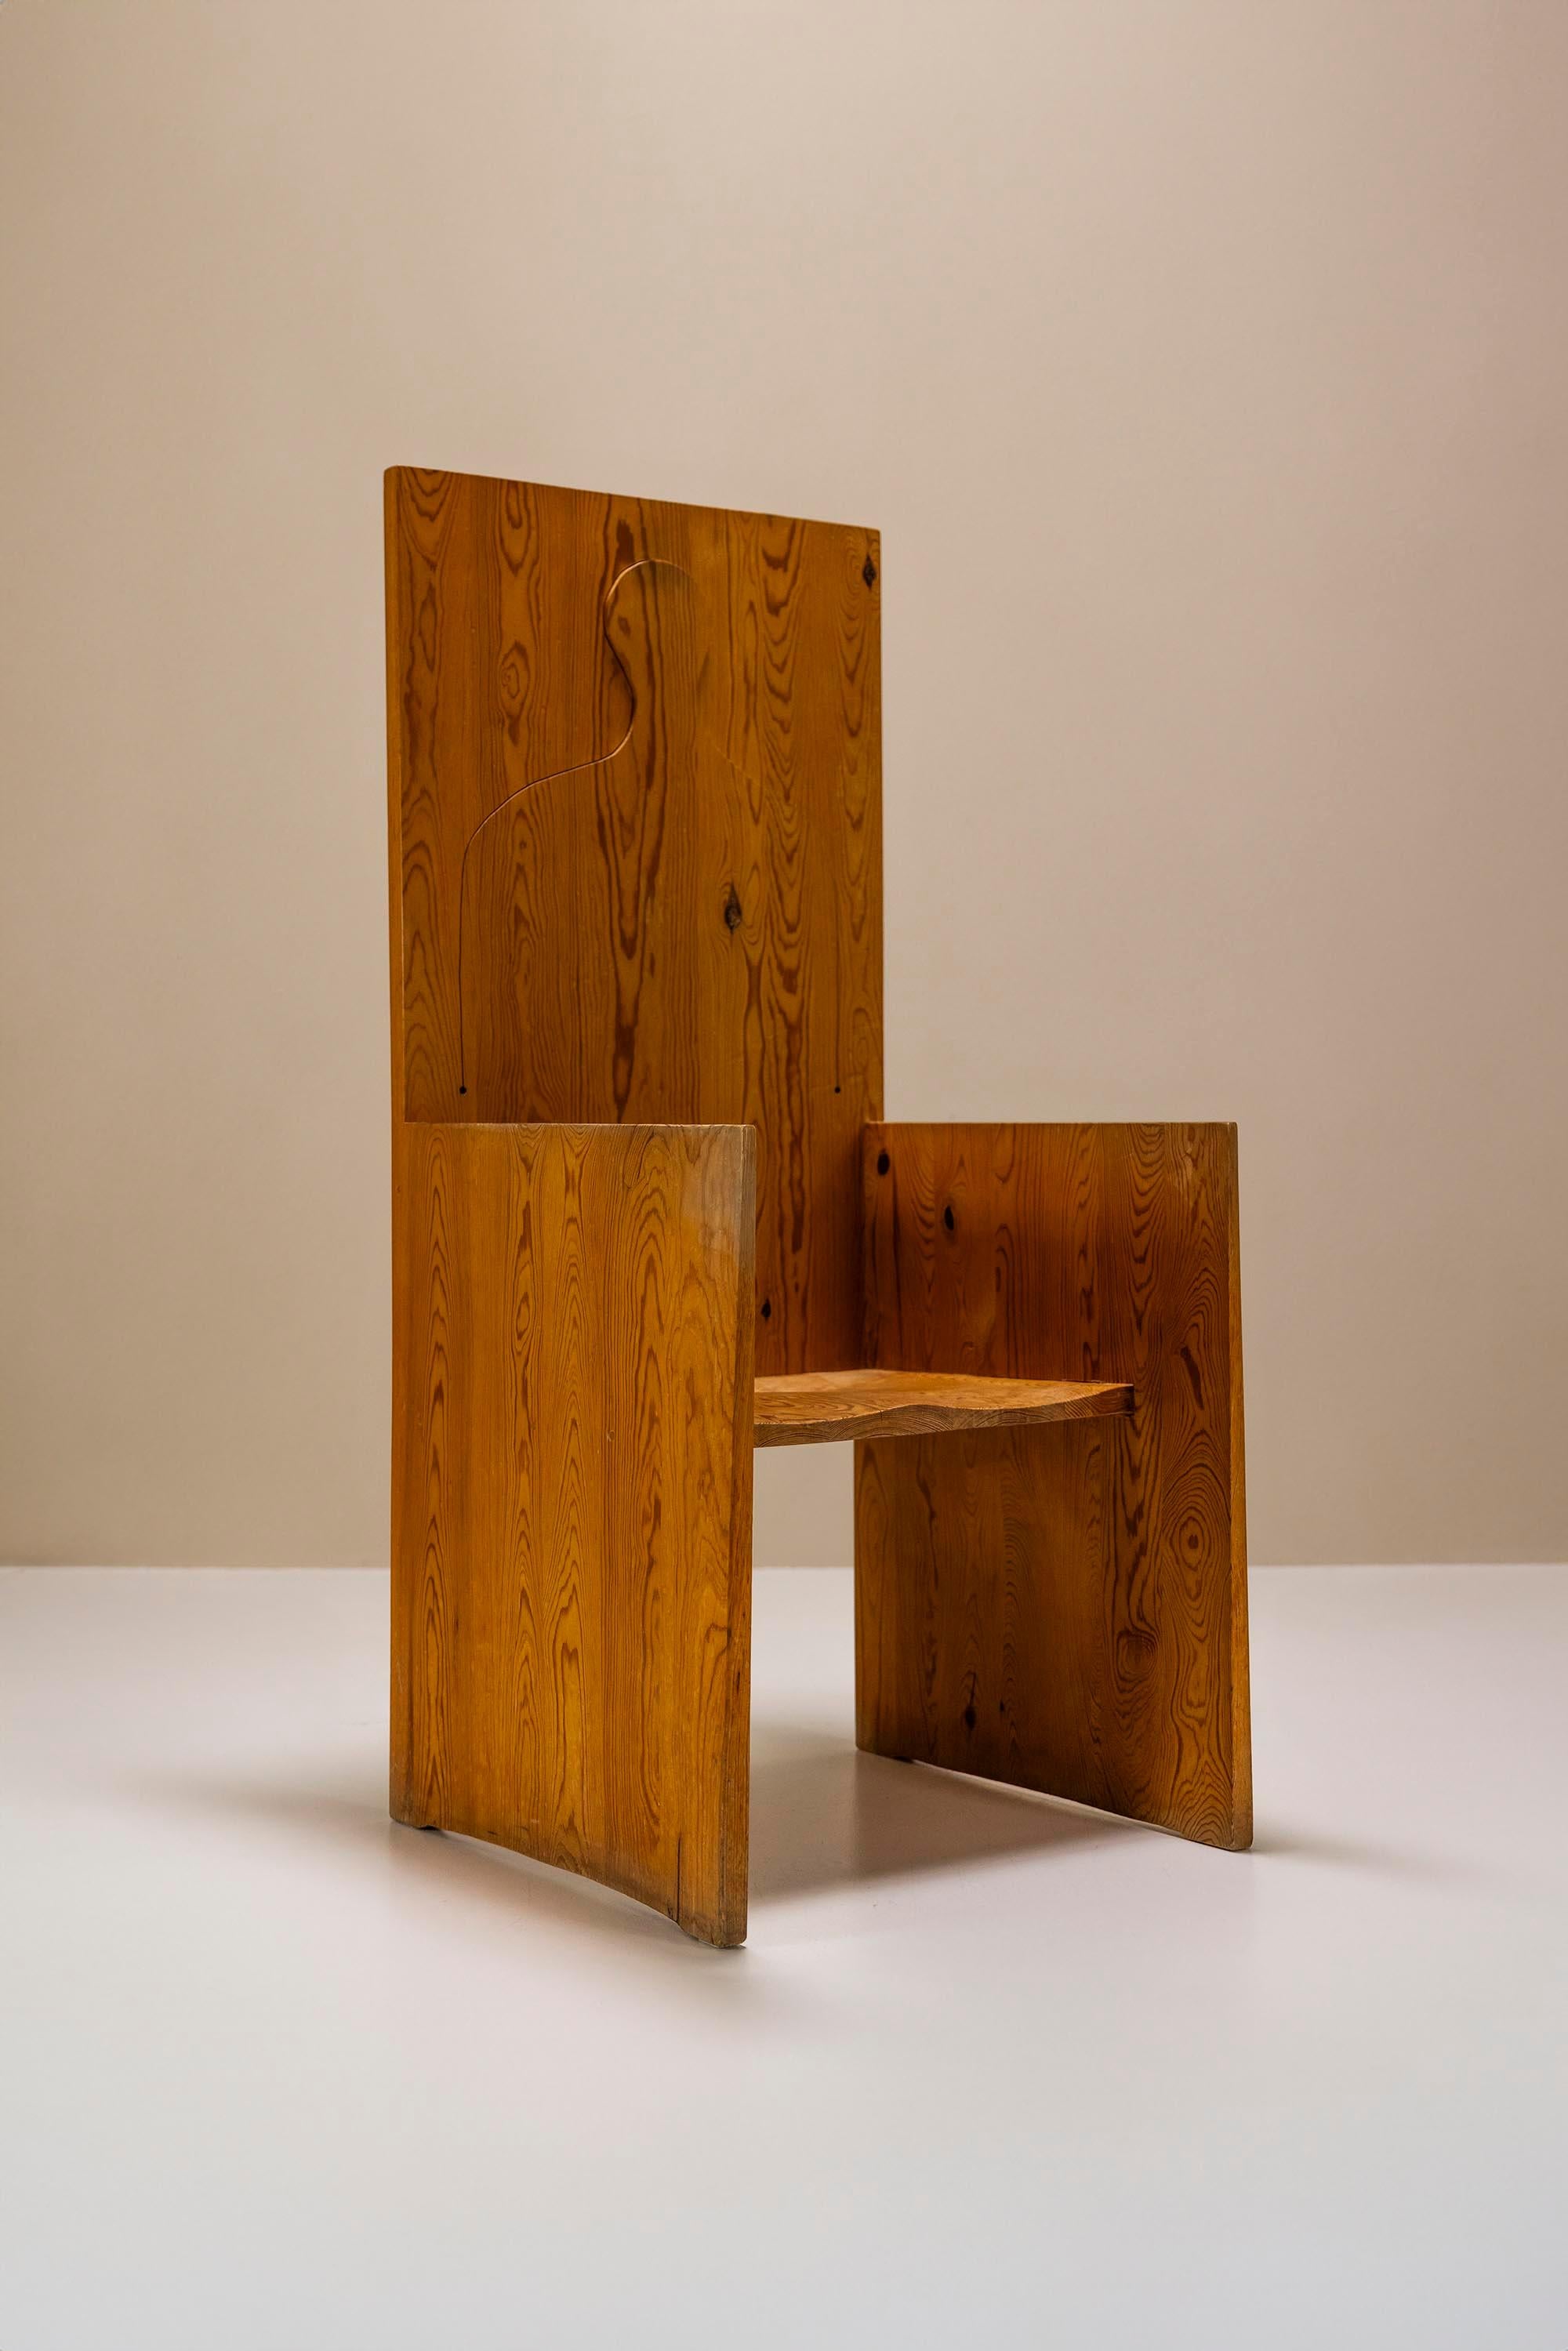 Late 20th Century Adamo Highback Chair with Silhouette in Pine by Ugo Marano, Italy 1978 For Sale